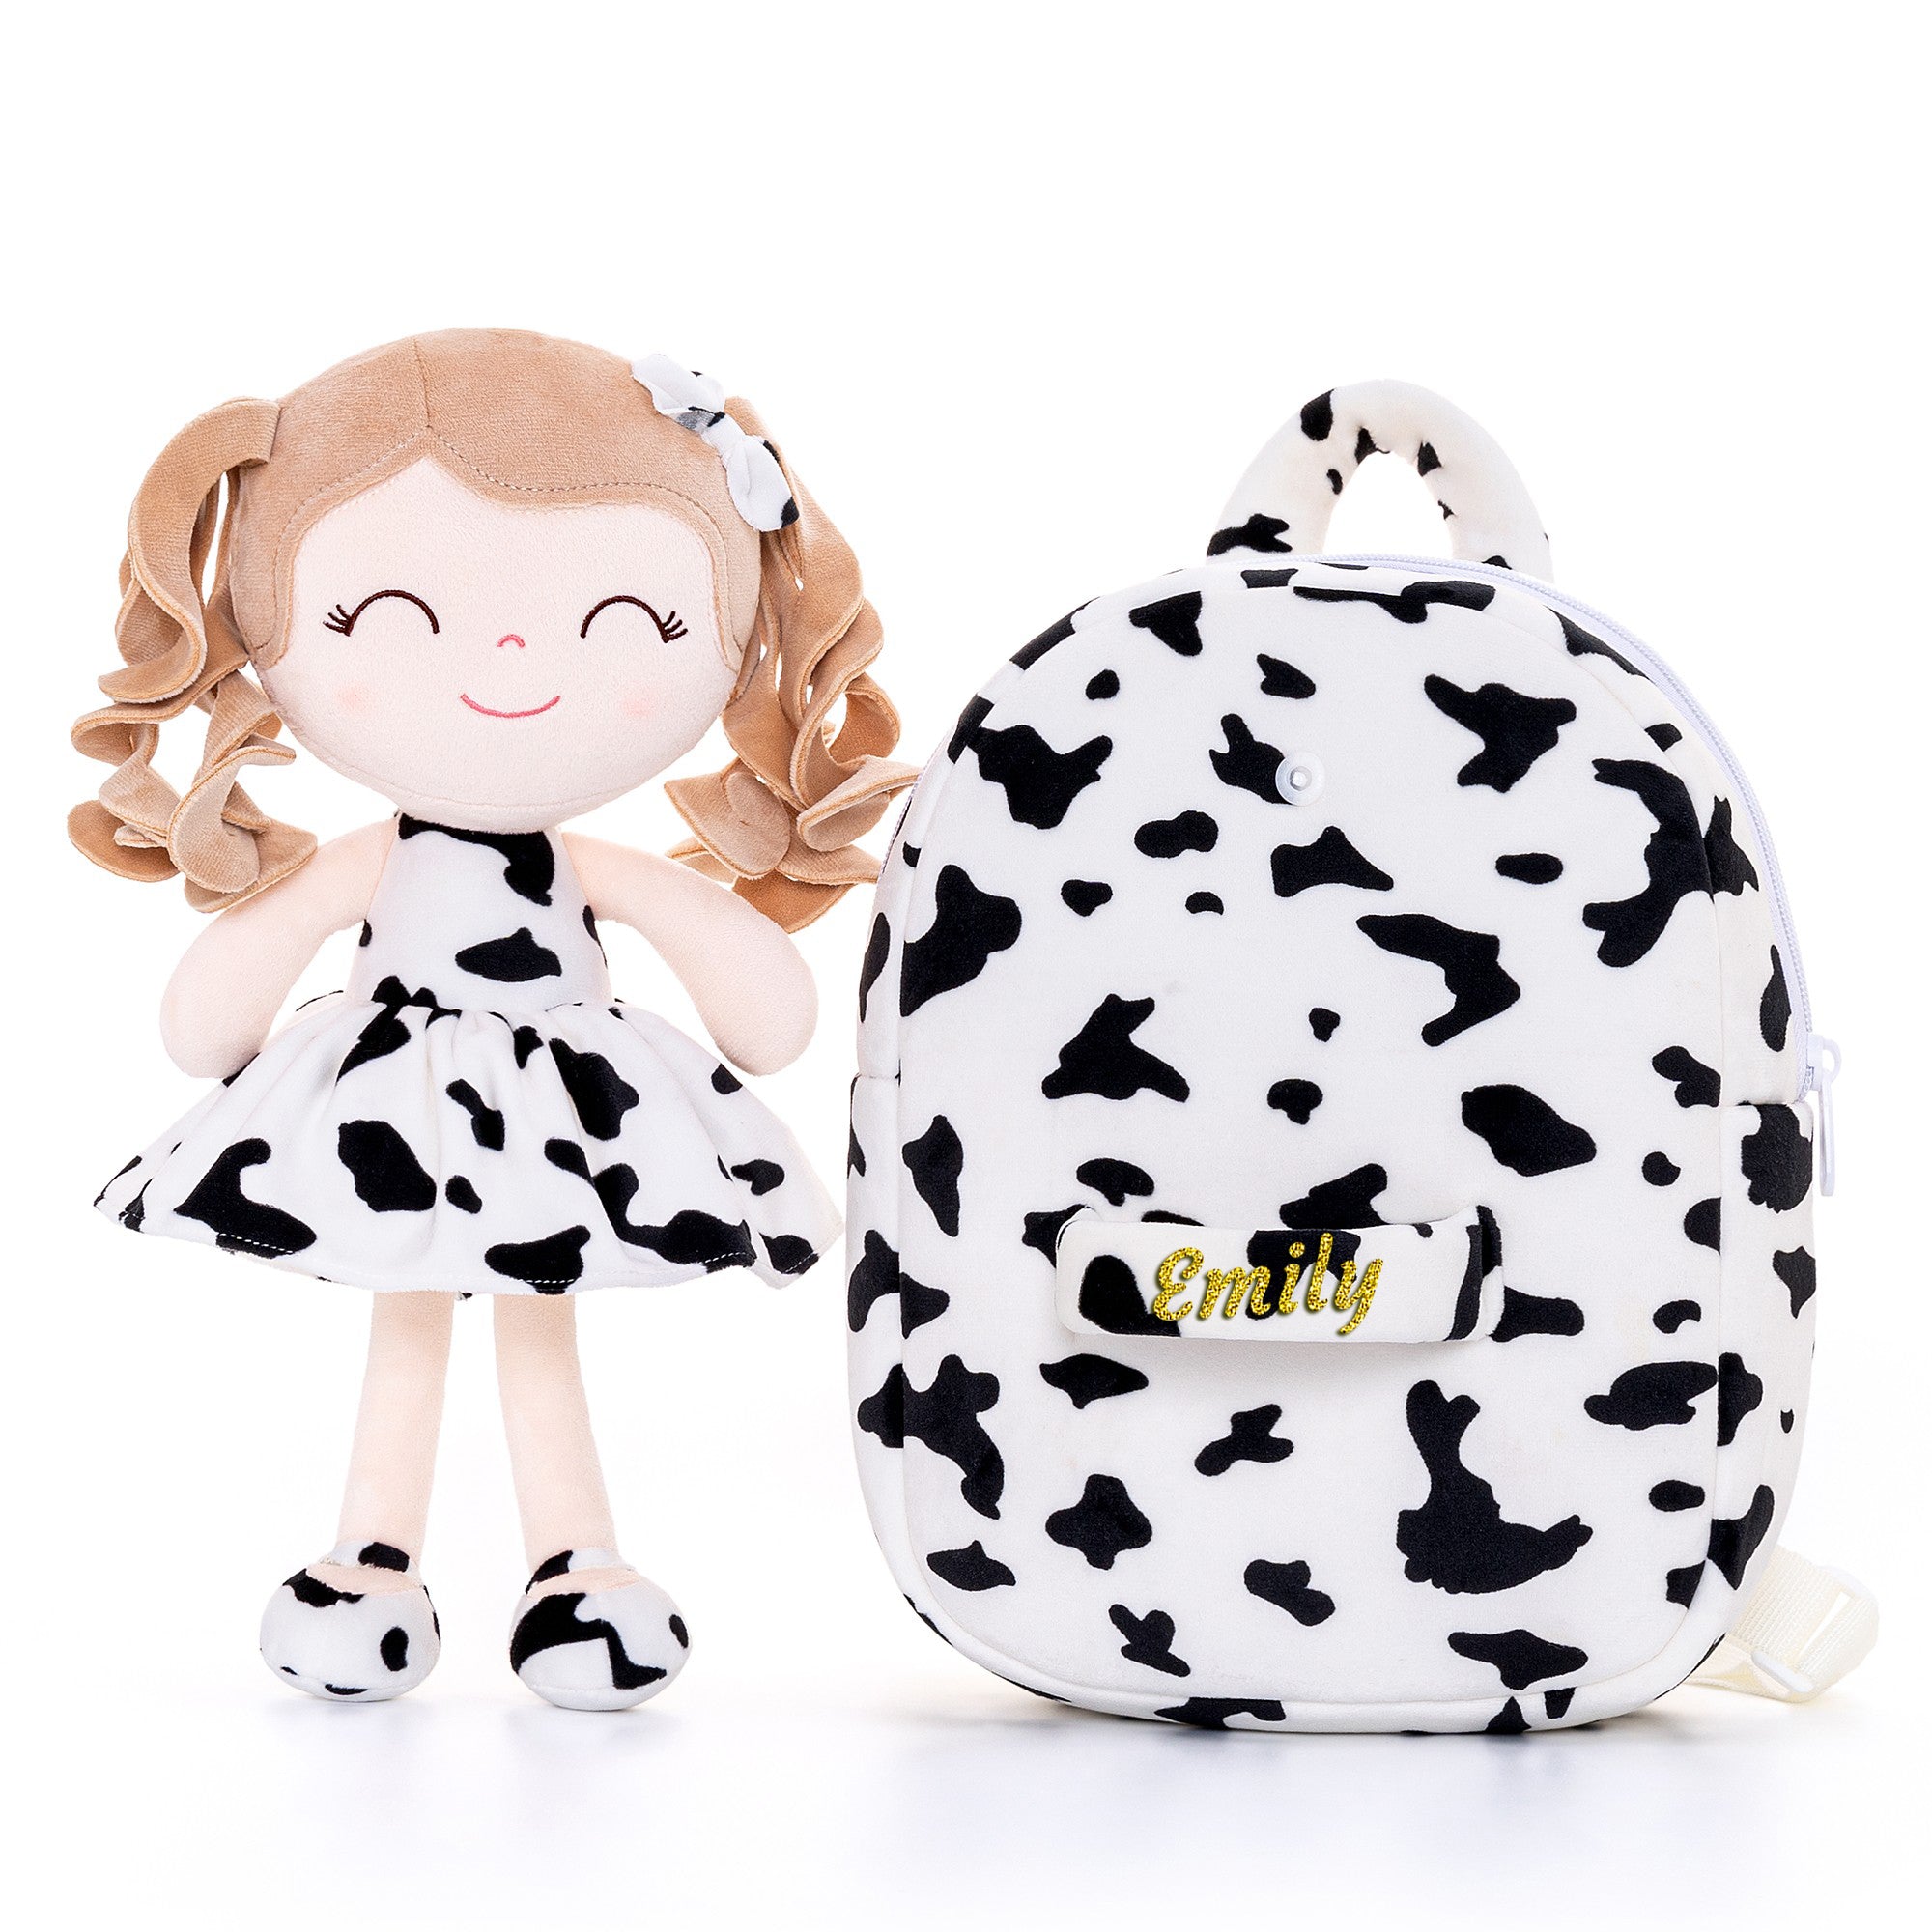 Gloveleya 9-inch Personalized Plush Curly Animal Dolls Backpack Cow